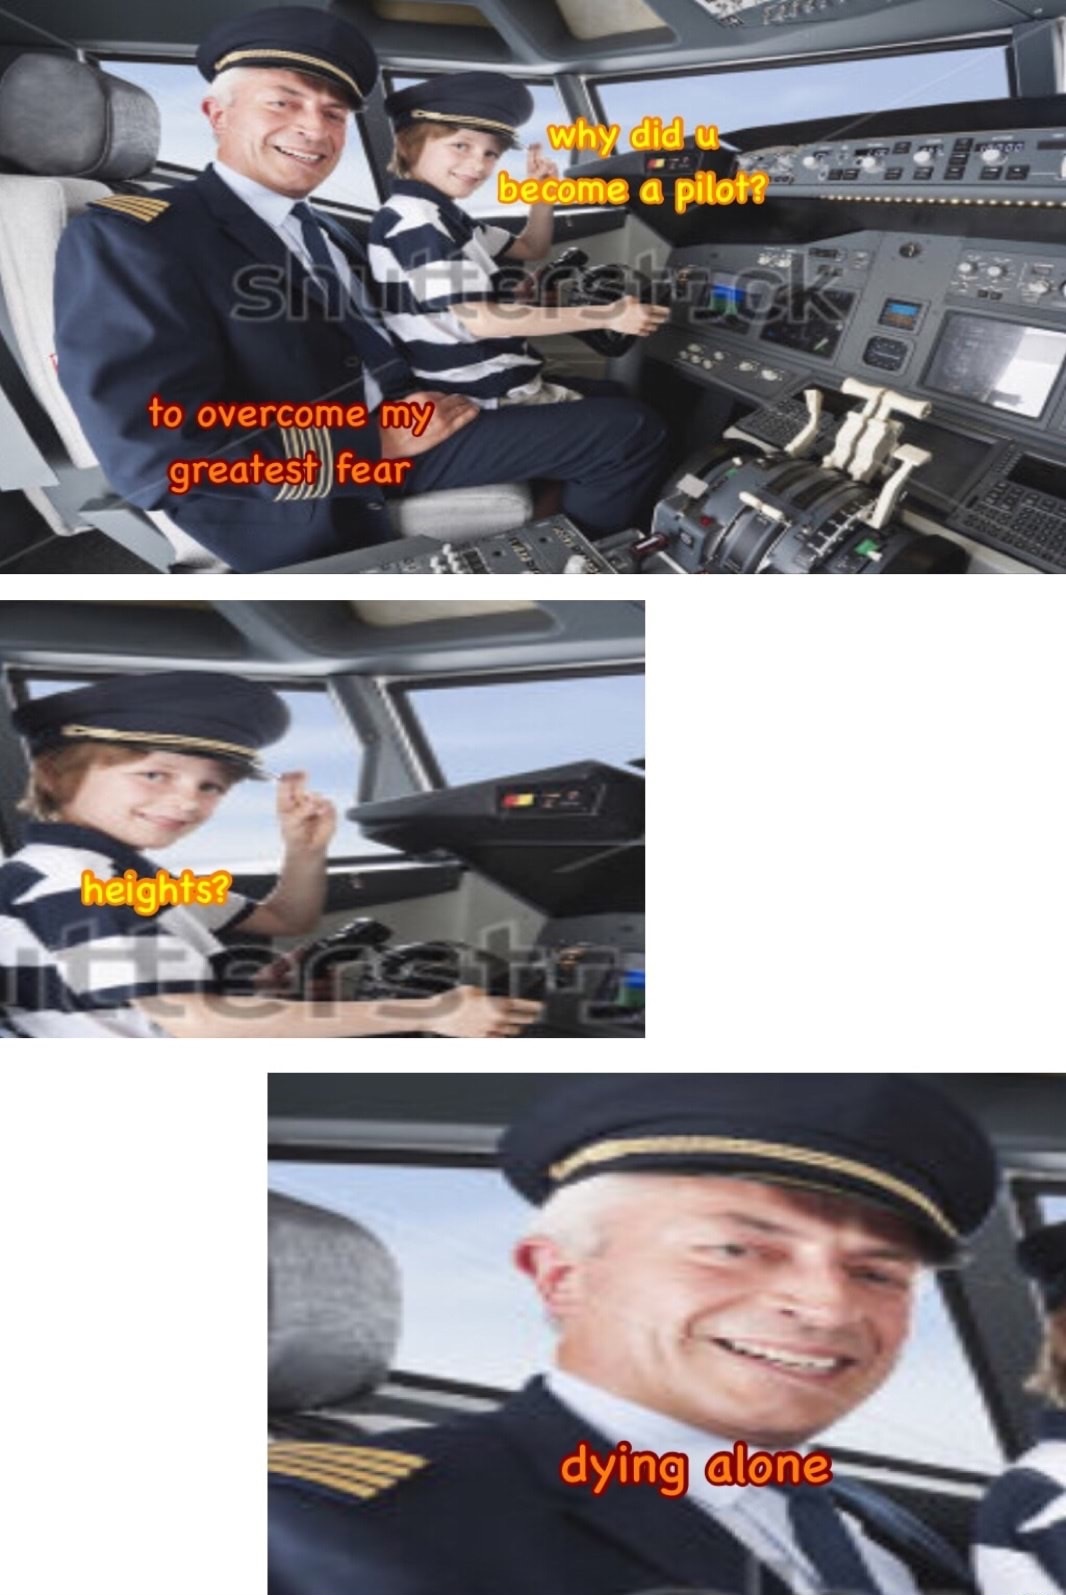 pilot dying alone meme - why did u become a pilot? Sinu to overcome my greatest fear heights? dying alone